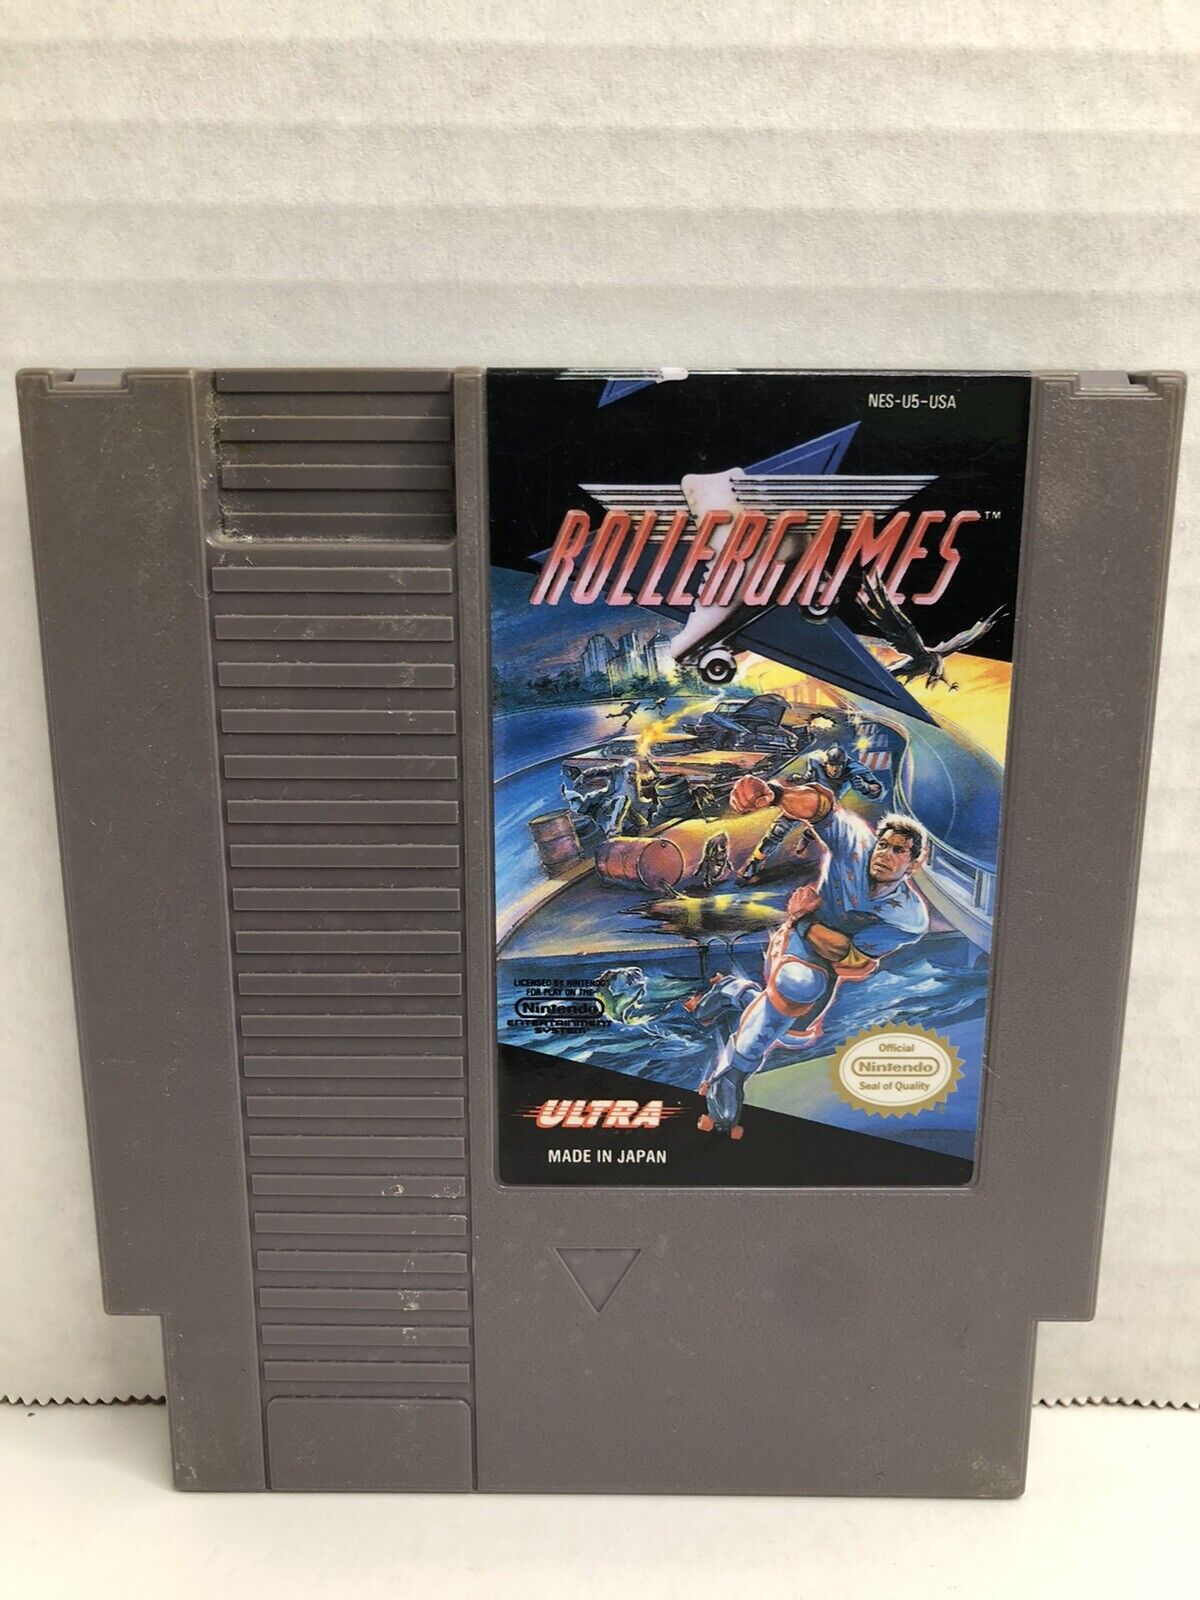 RollerGames (Nintendo Entertainment System, 1985) Authentic Cartridge Tested!